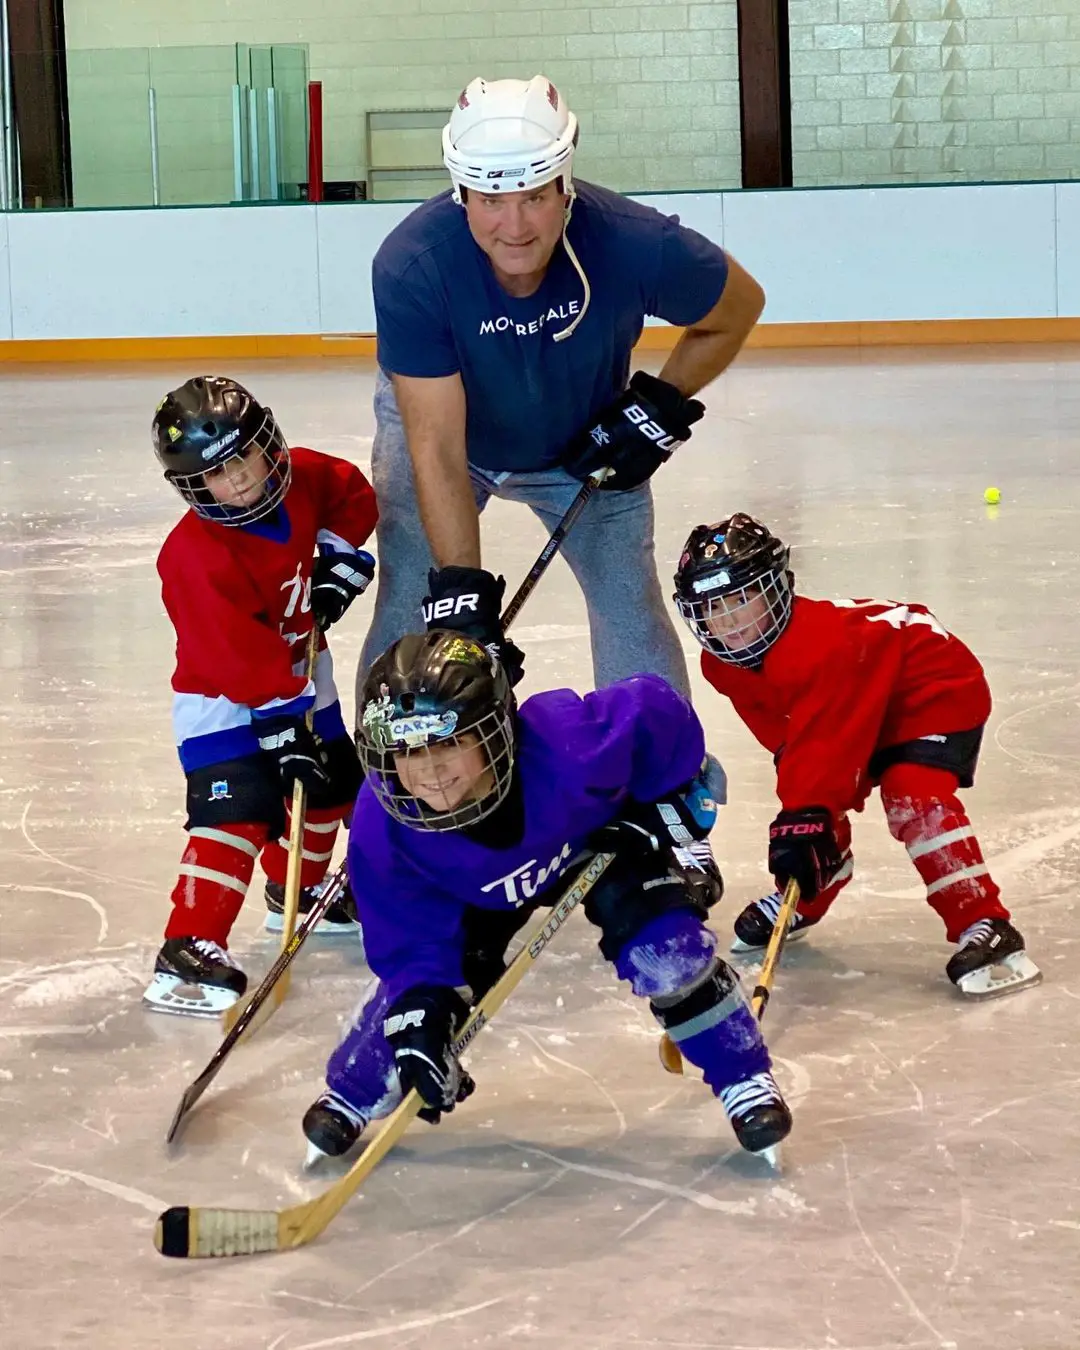 Eric playing hockey with his children.